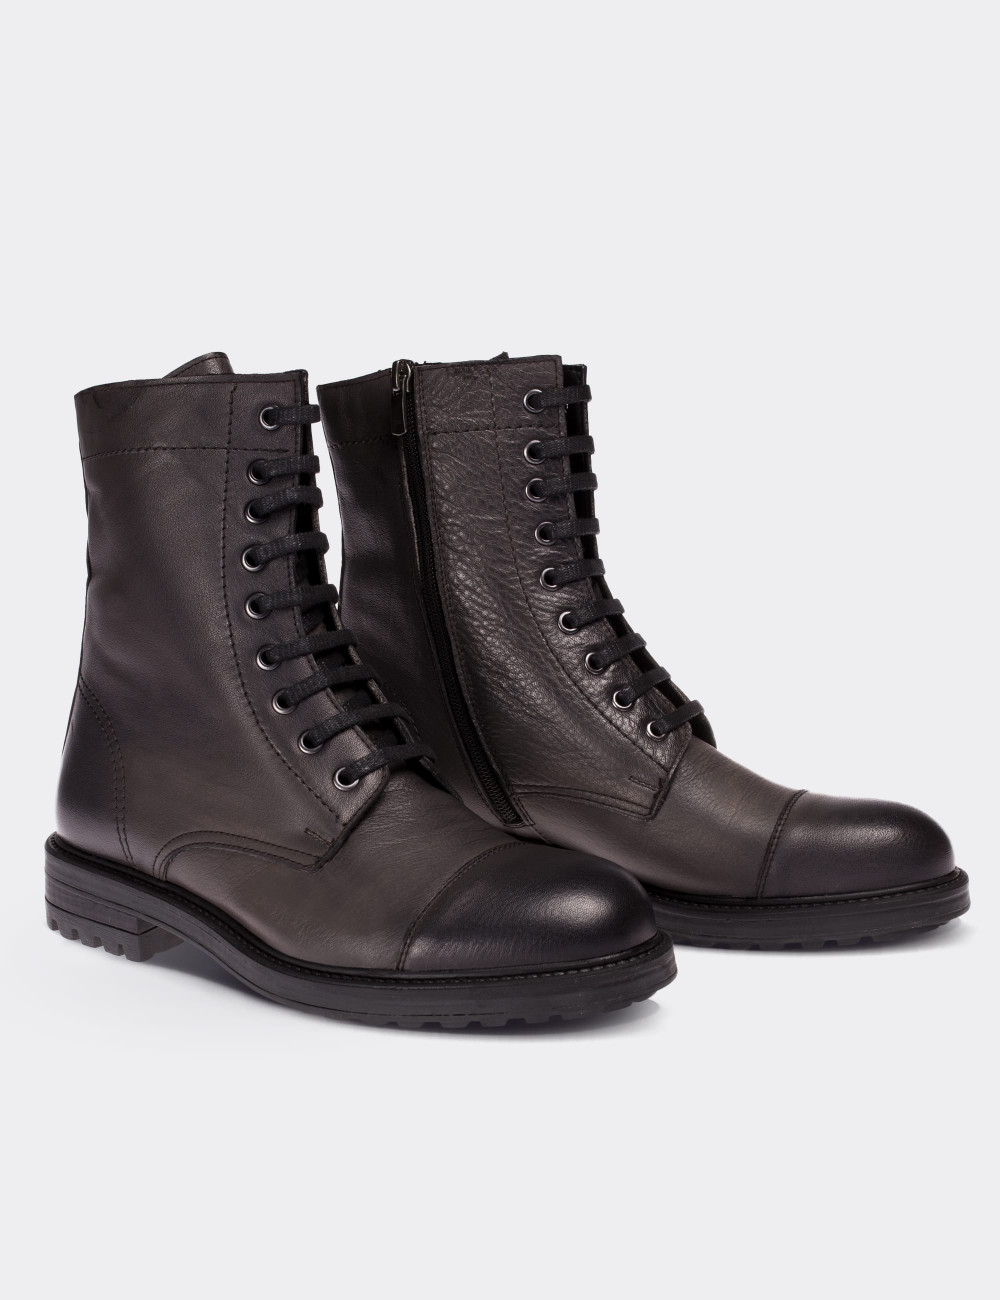 Gray  Leather Postal Boots - 01857MGRIC01